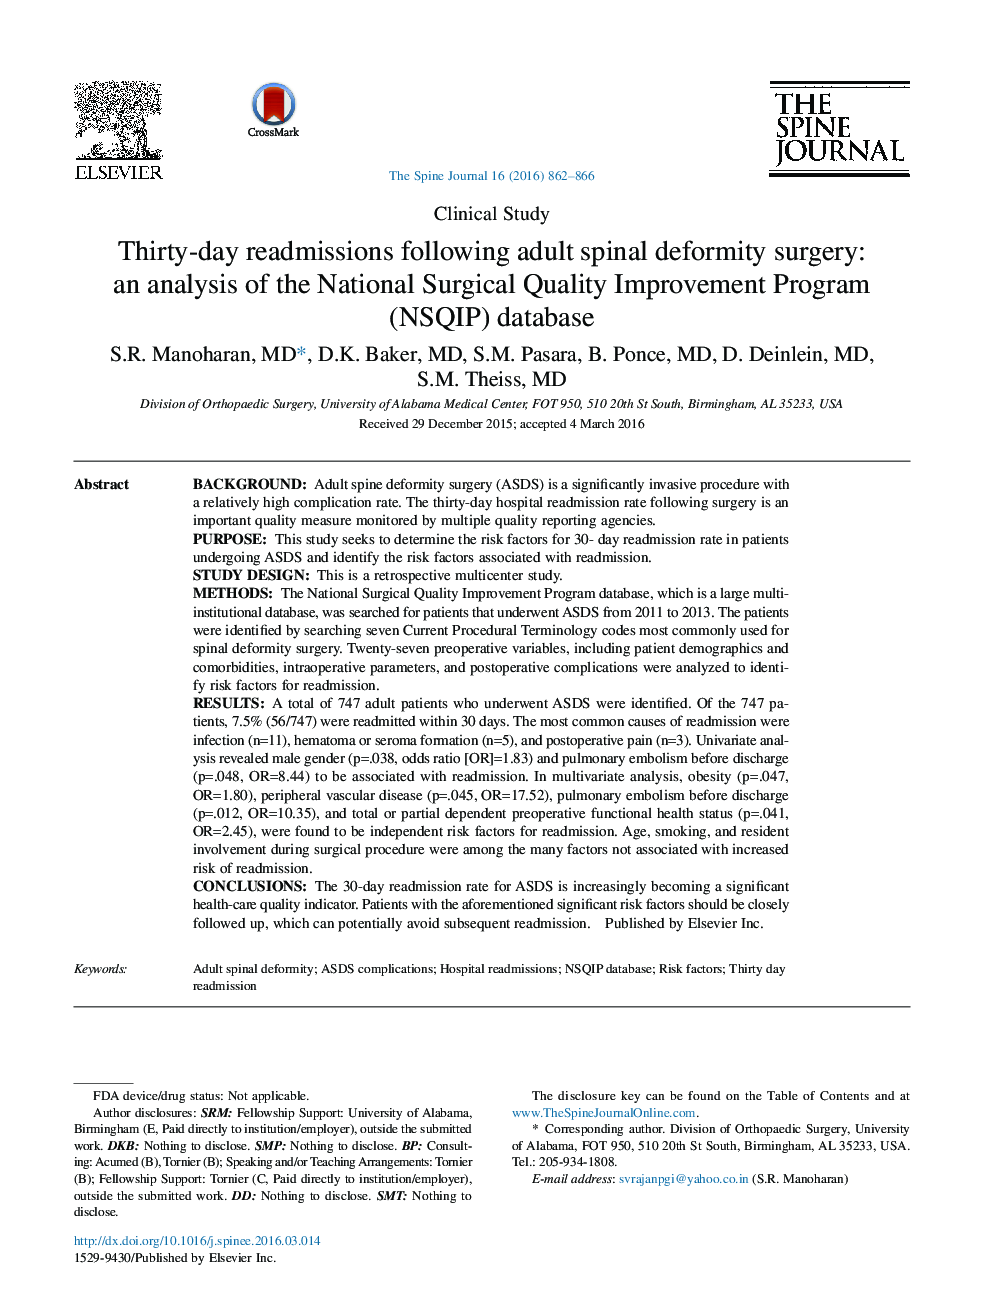 Thirty-day readmissions following adult spinal deformity surgery: an analysis of the National Surgical Quality Improvement Program (NSQIP) database 